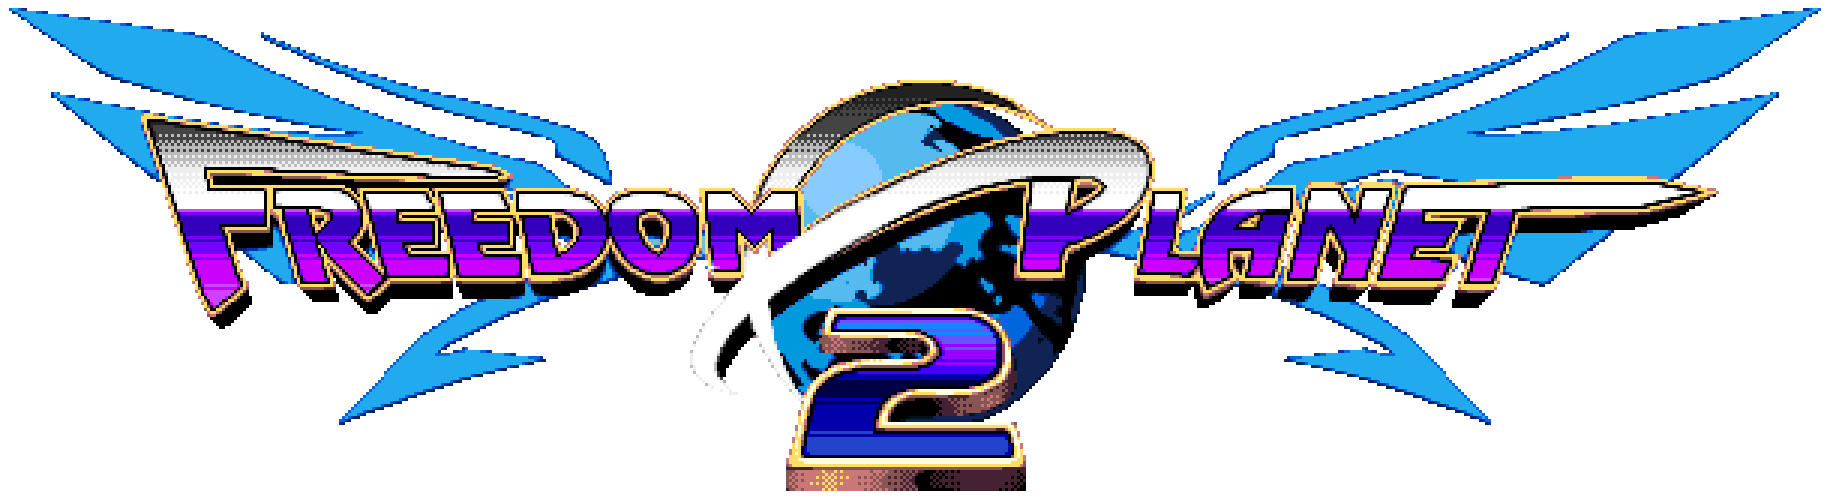 freedom planet 2 test build